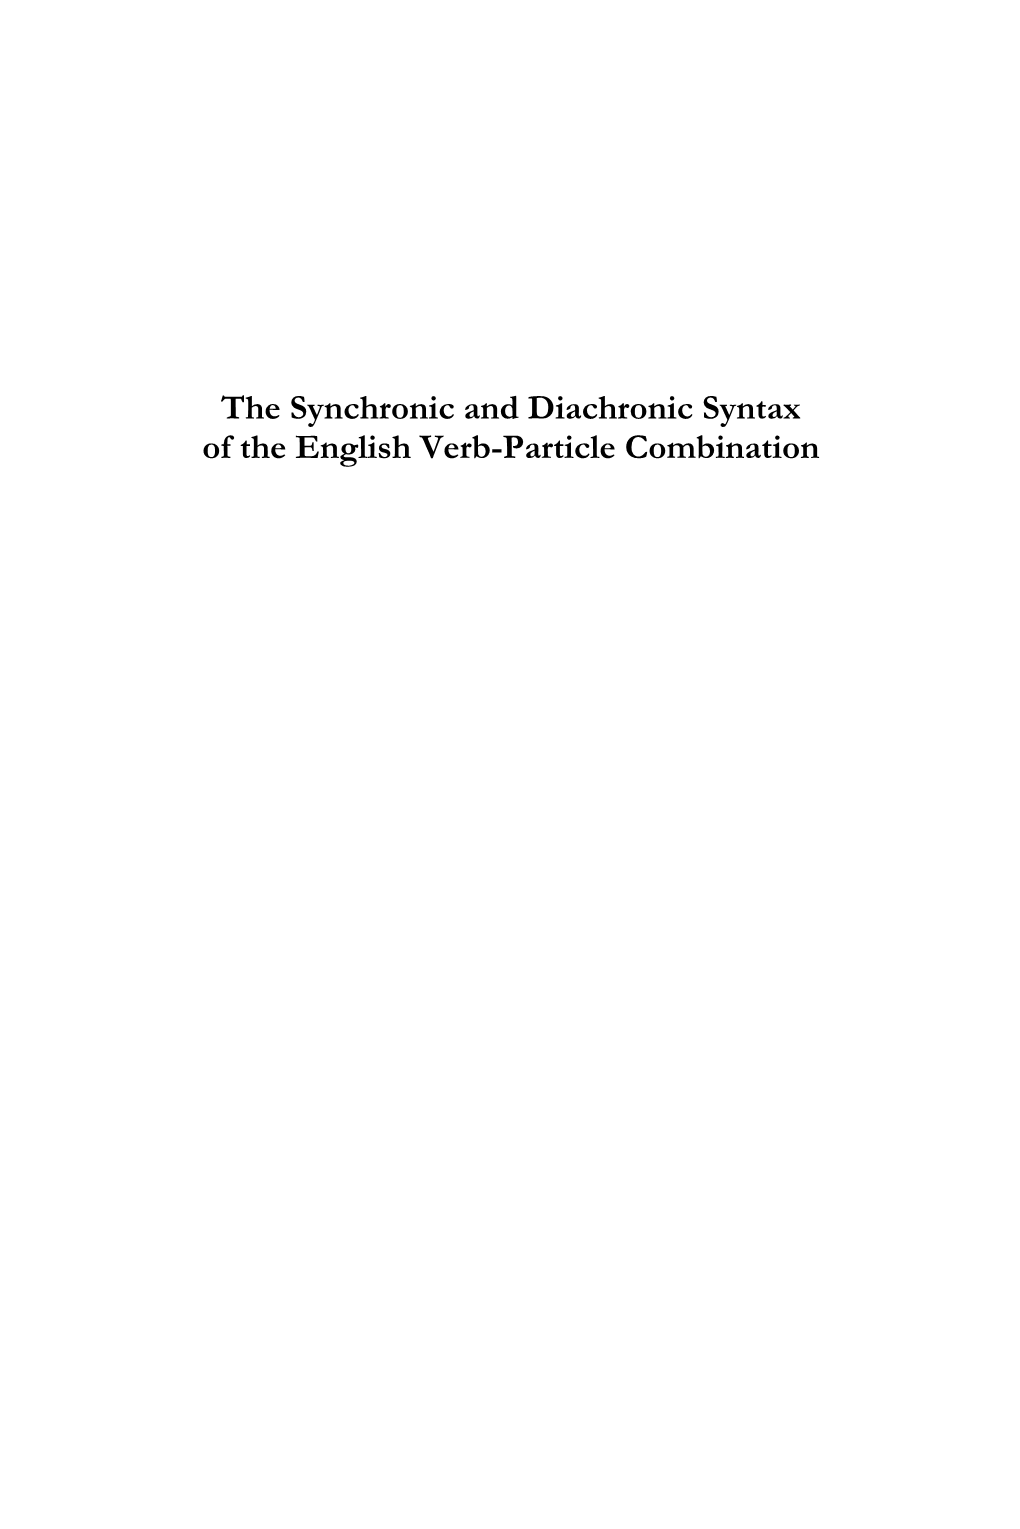 The Synchronic and Diachronic Syntax of the English Verb-Particle Combination